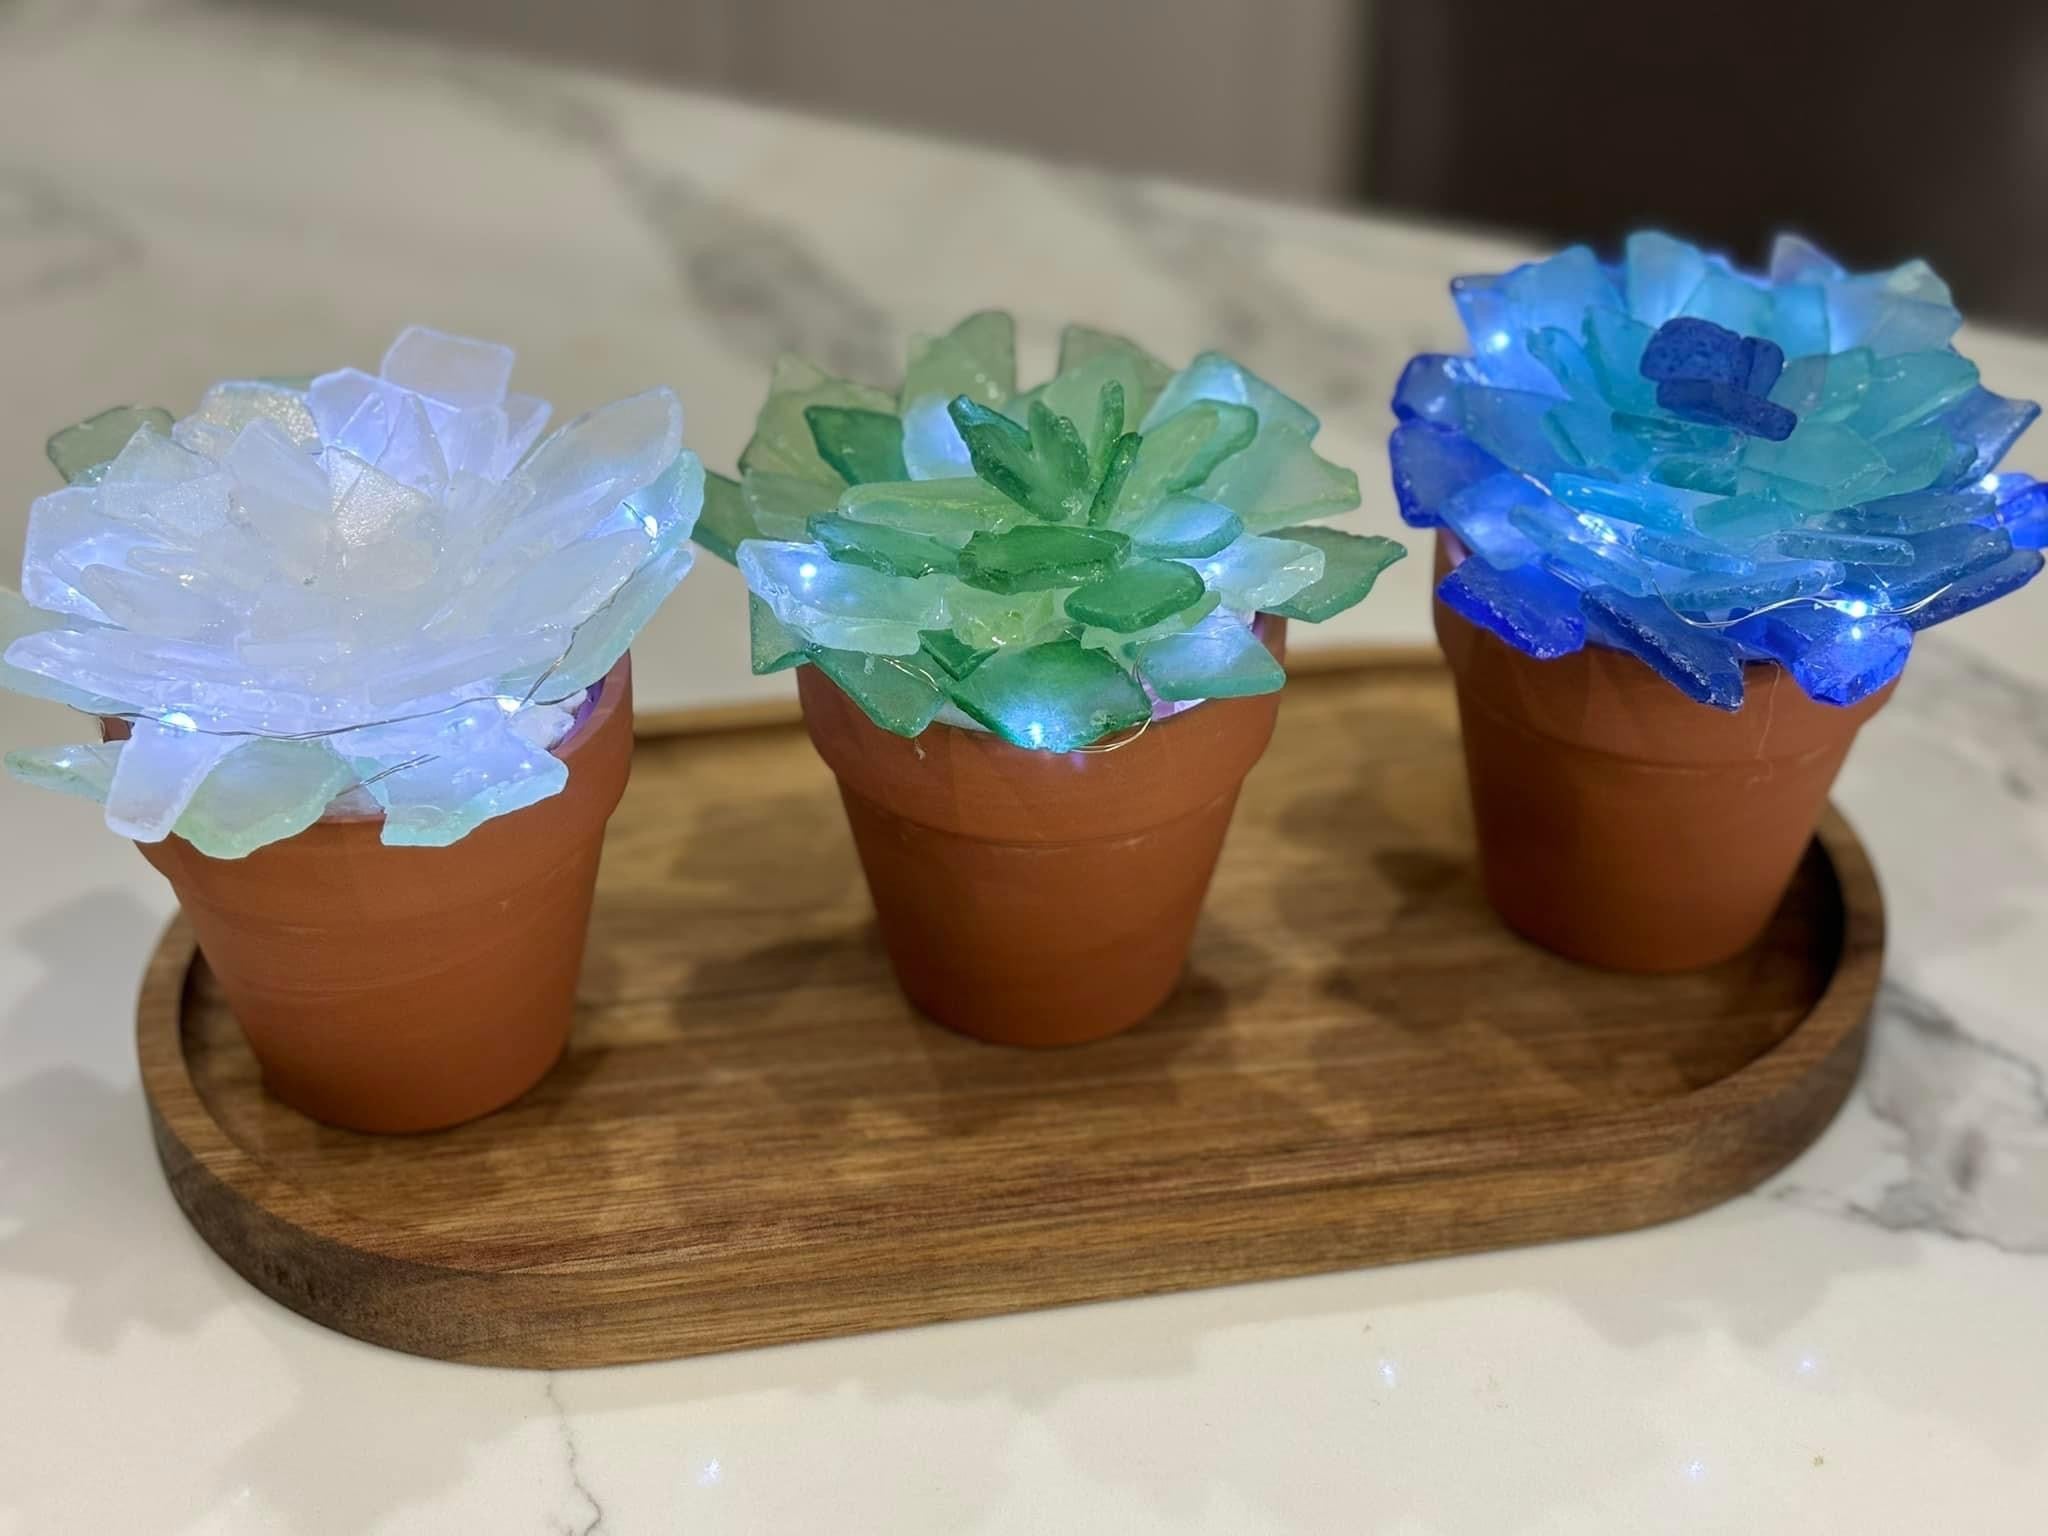 SEA-INSPIRED GLASS TREES & SUCCLENTS MAY 3RD, 11AM